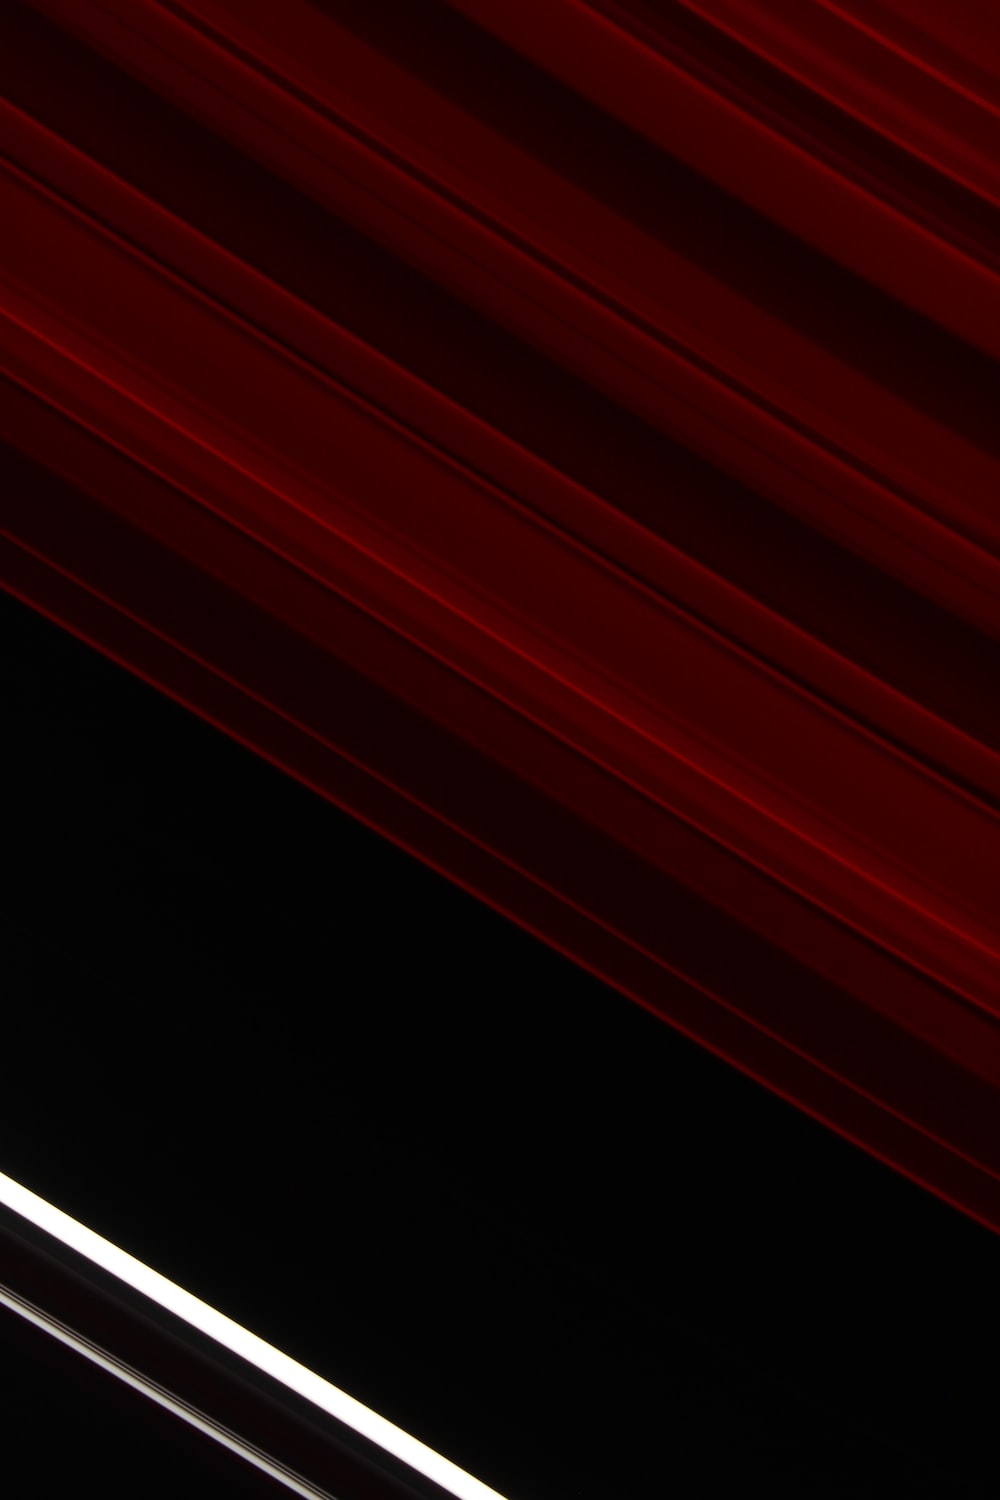 red stripes on a black background photo